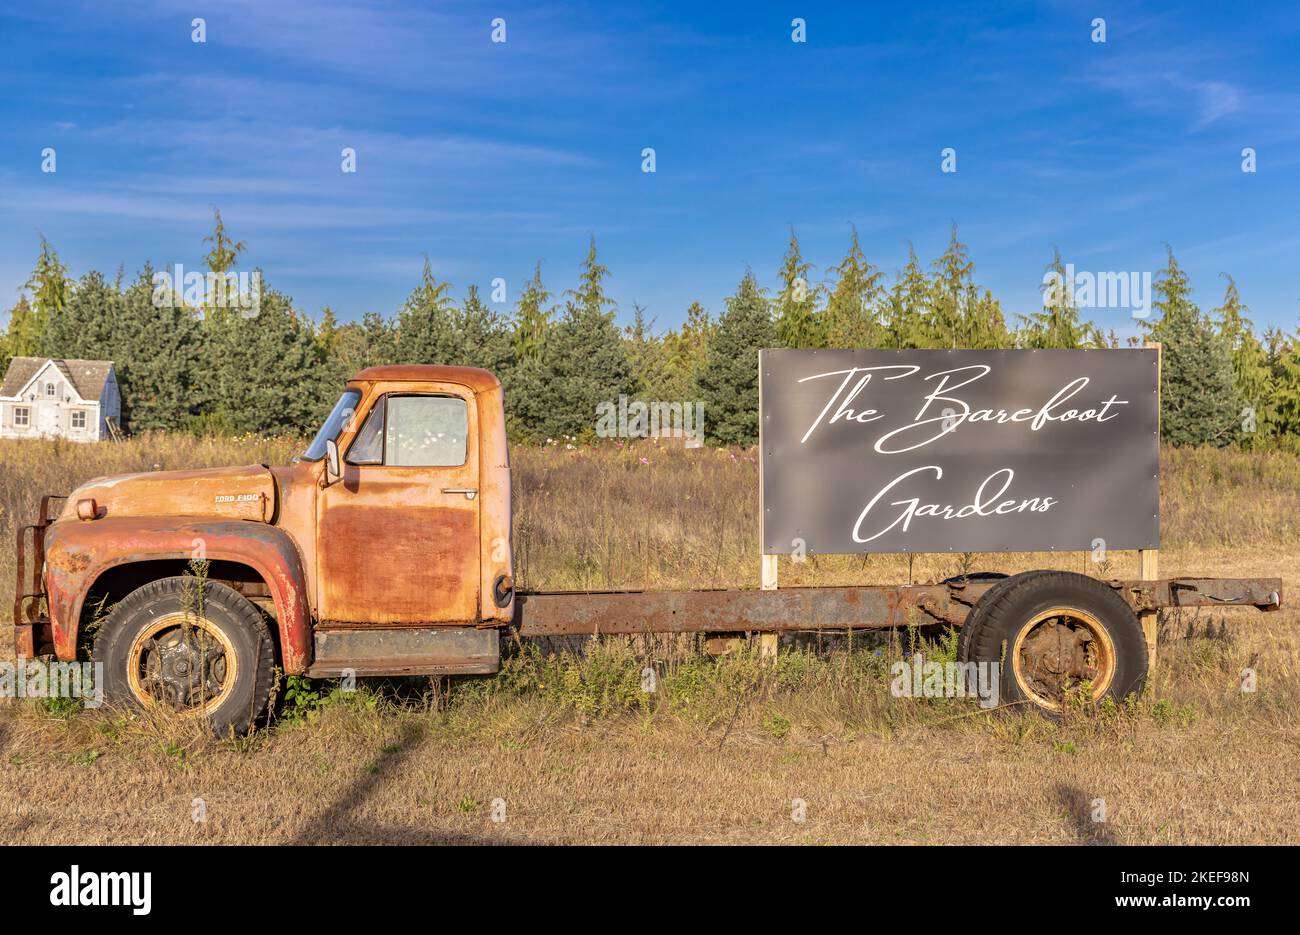 An old truck advertising the barefoot gardens Stock Photo